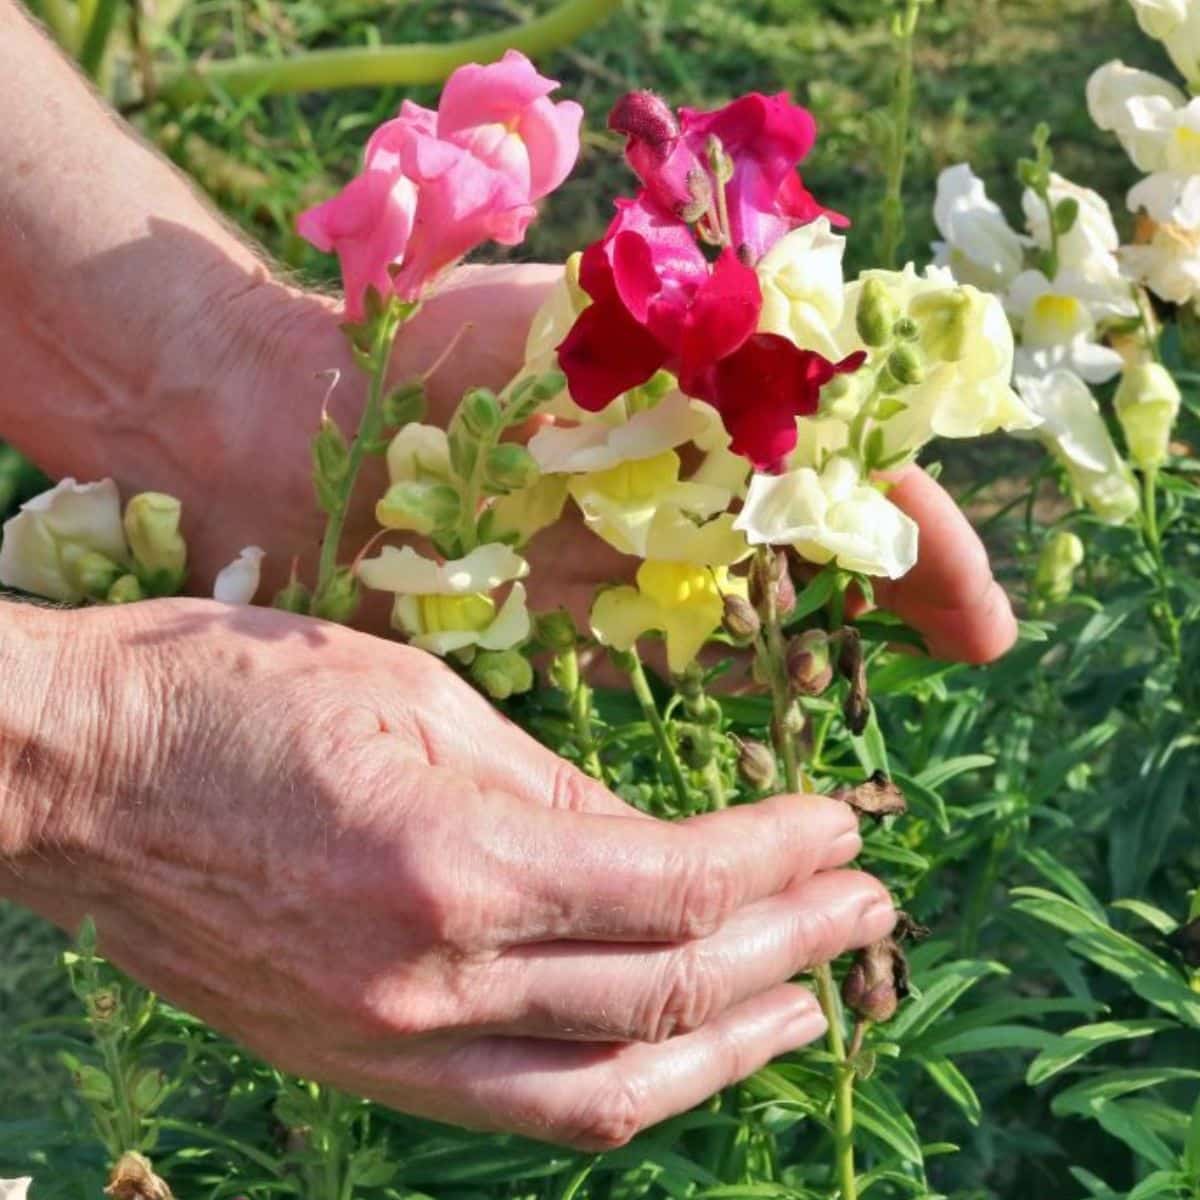 An elderly woman touches snapdragons in full bloom.